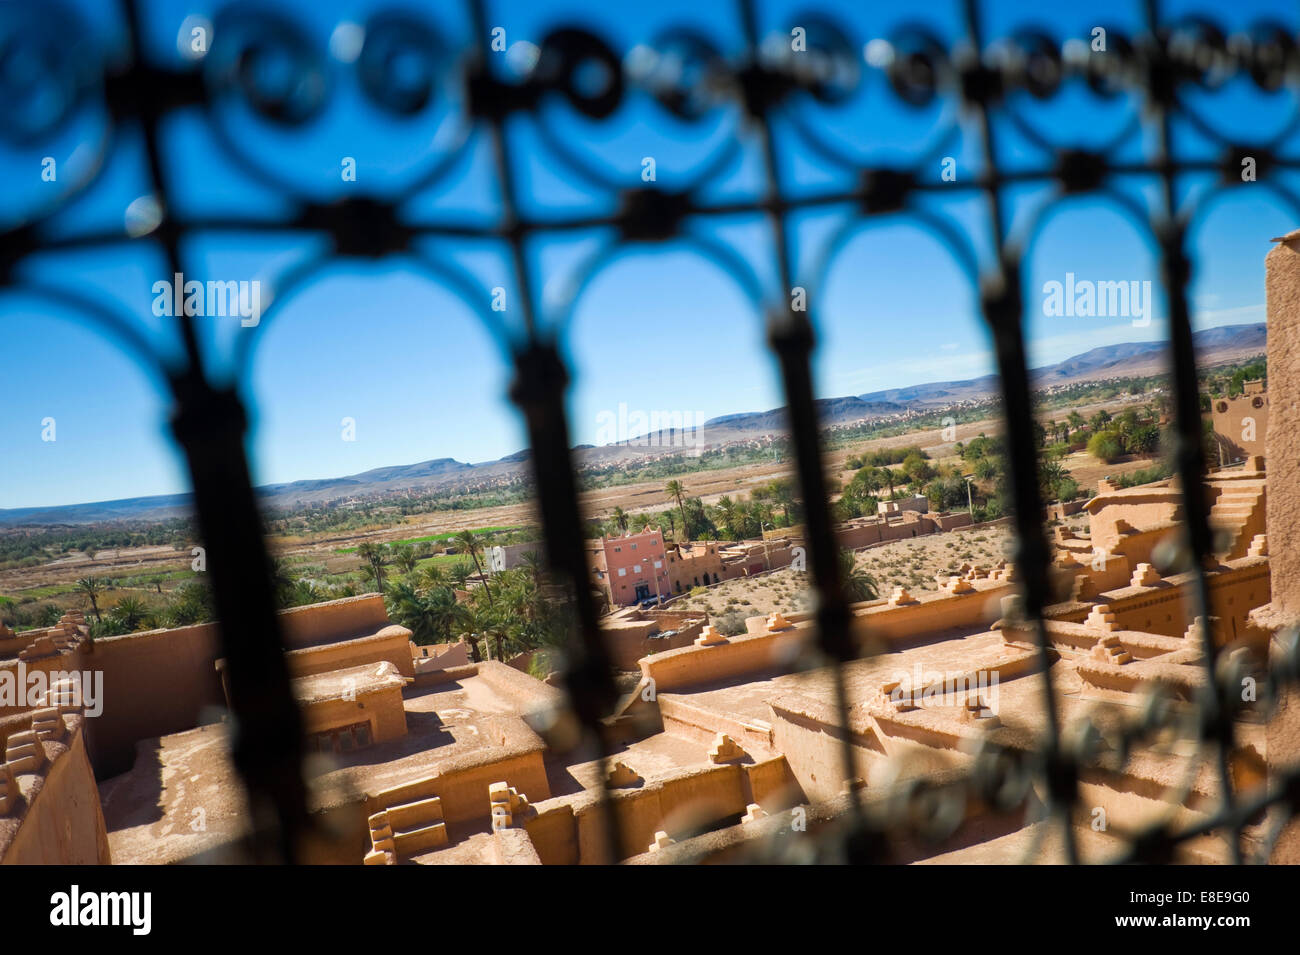 Horizontal view through the ornamental railings of Kasbah Taourirt in Ouarzazate. Stock Photo